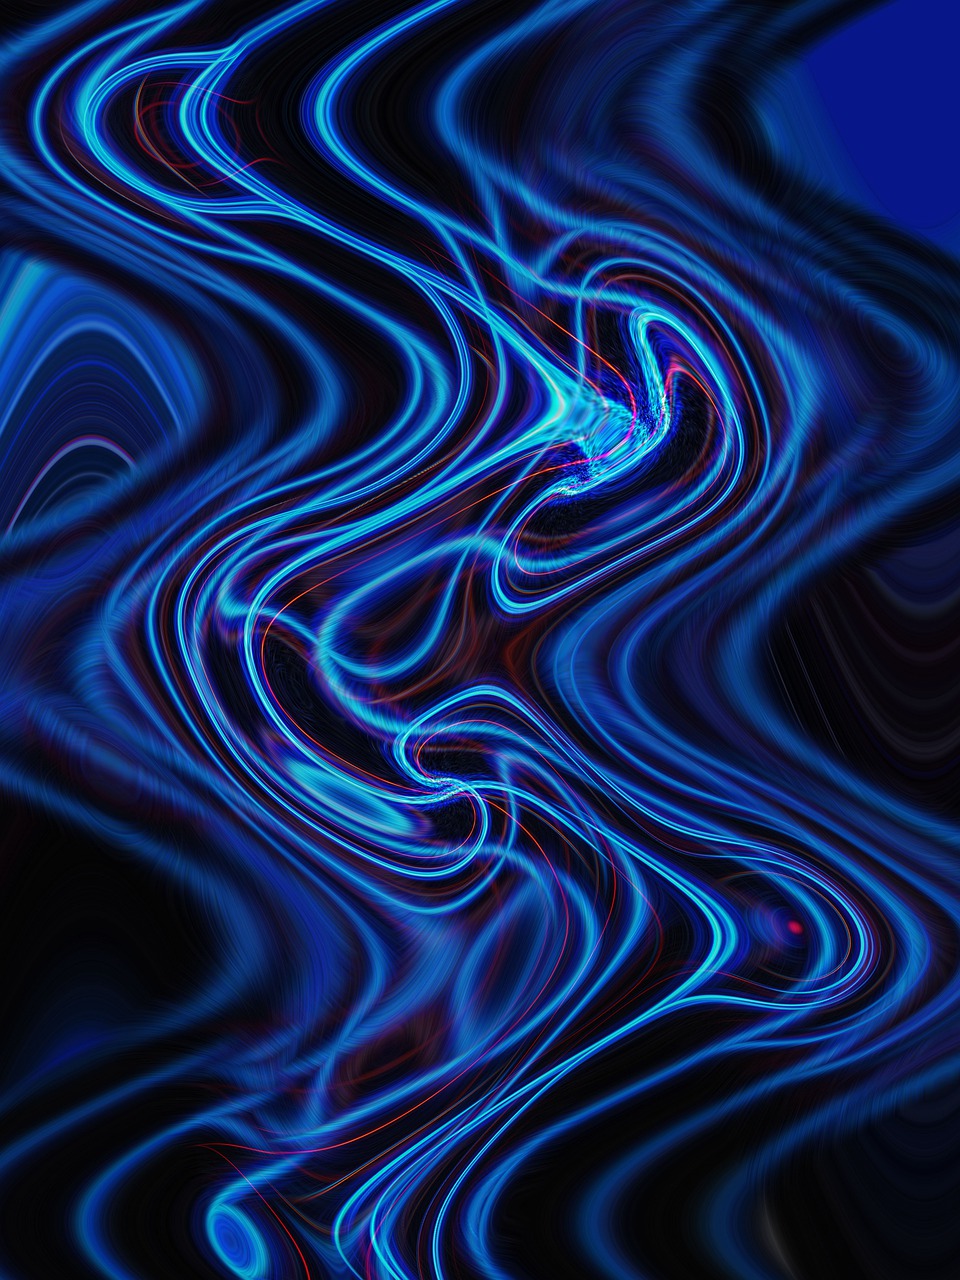 a close up of a blue and black background, digital art, abstract illusionism, energy flows of water and fire, neon outlines, sinuous, intertwined a dissolving